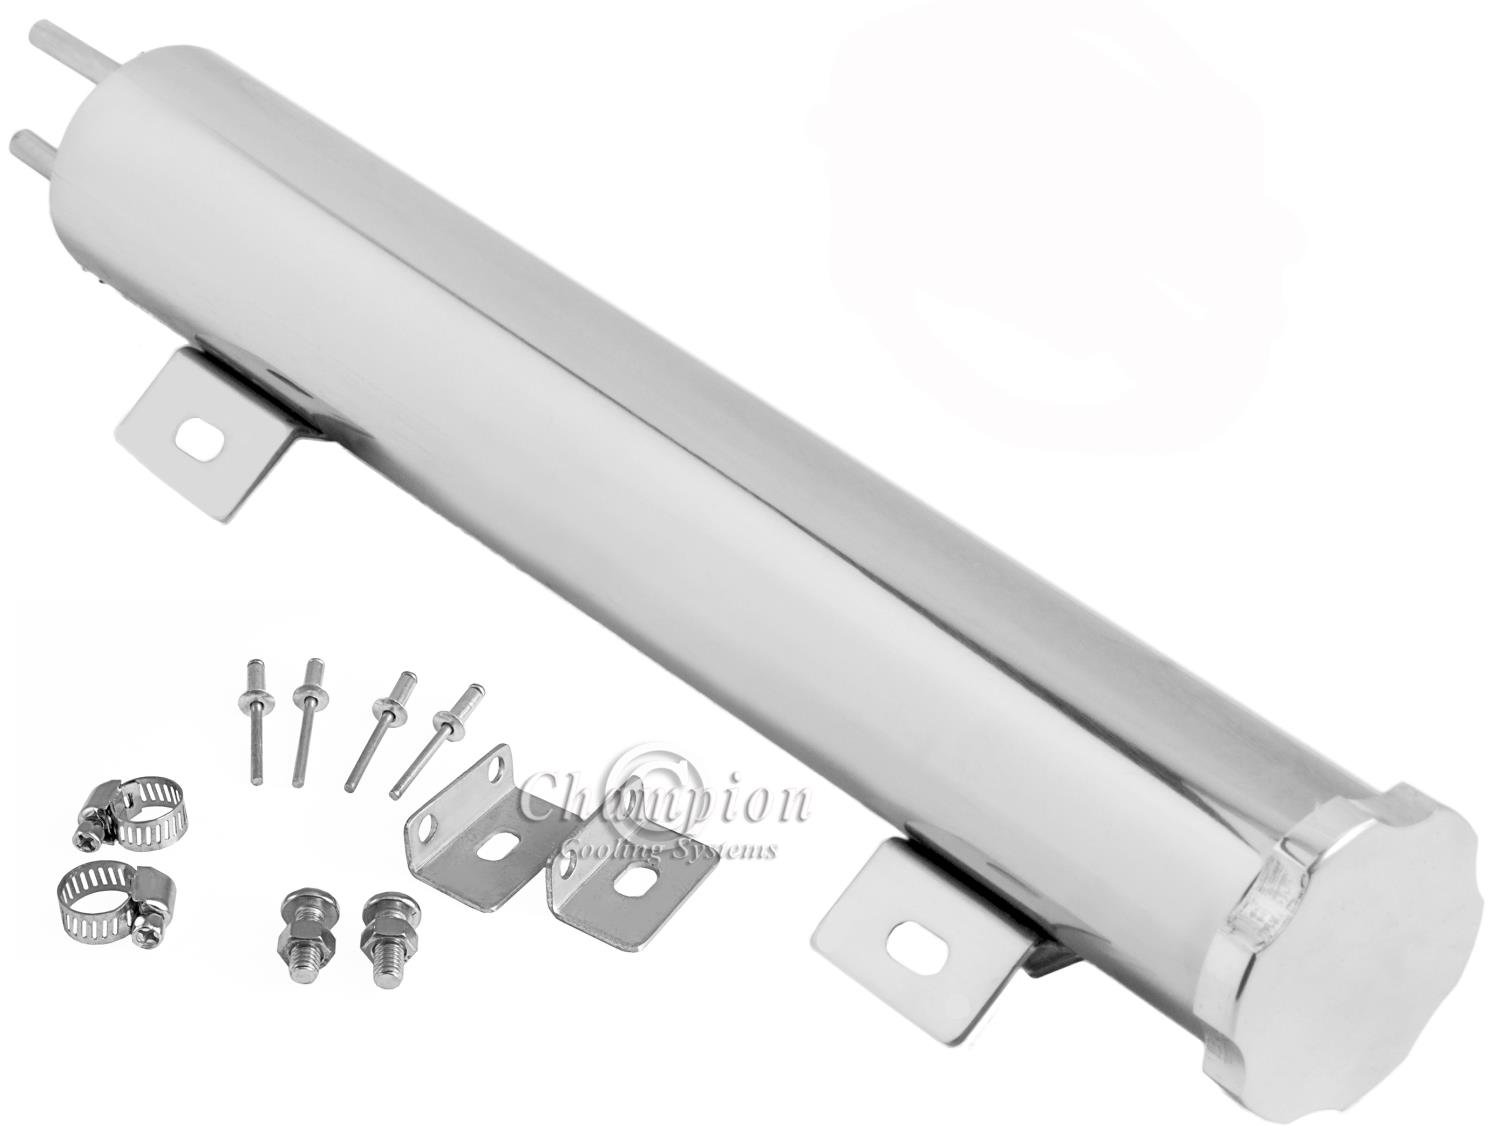 Radiator Overflow Tank 2 in. D x 13 in. L - Polished Finish